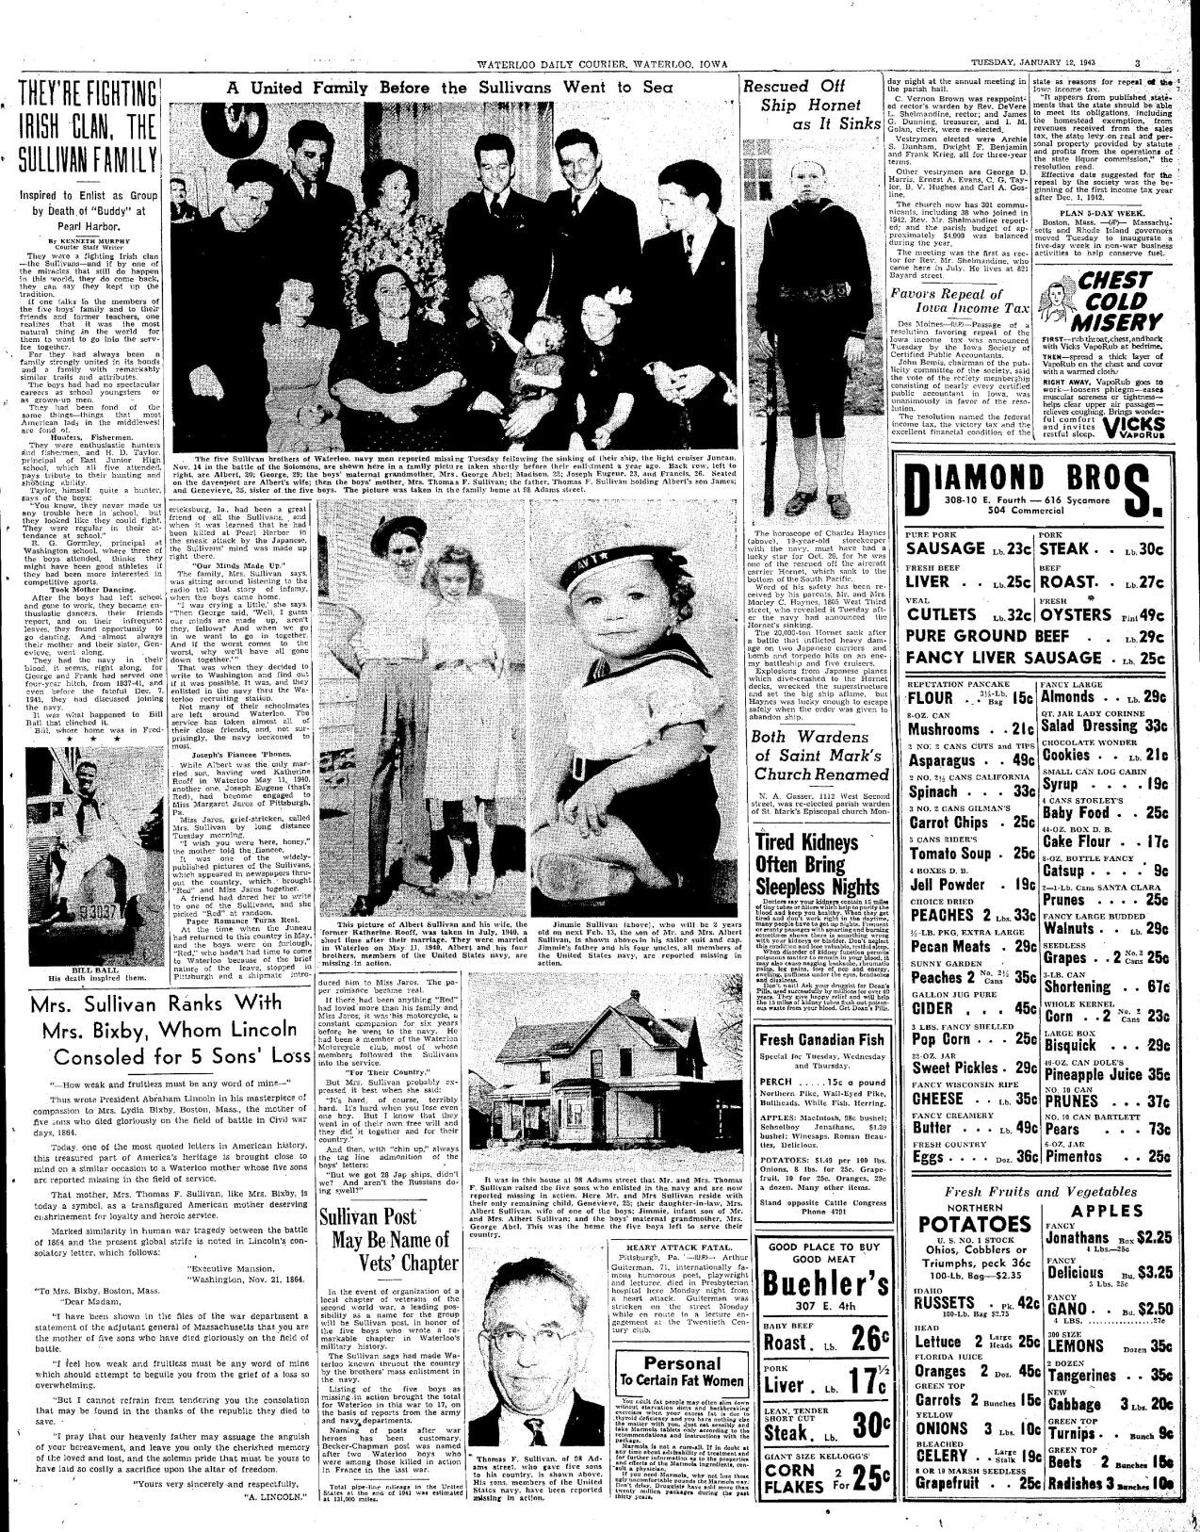 Courier Jan. 12, 1943